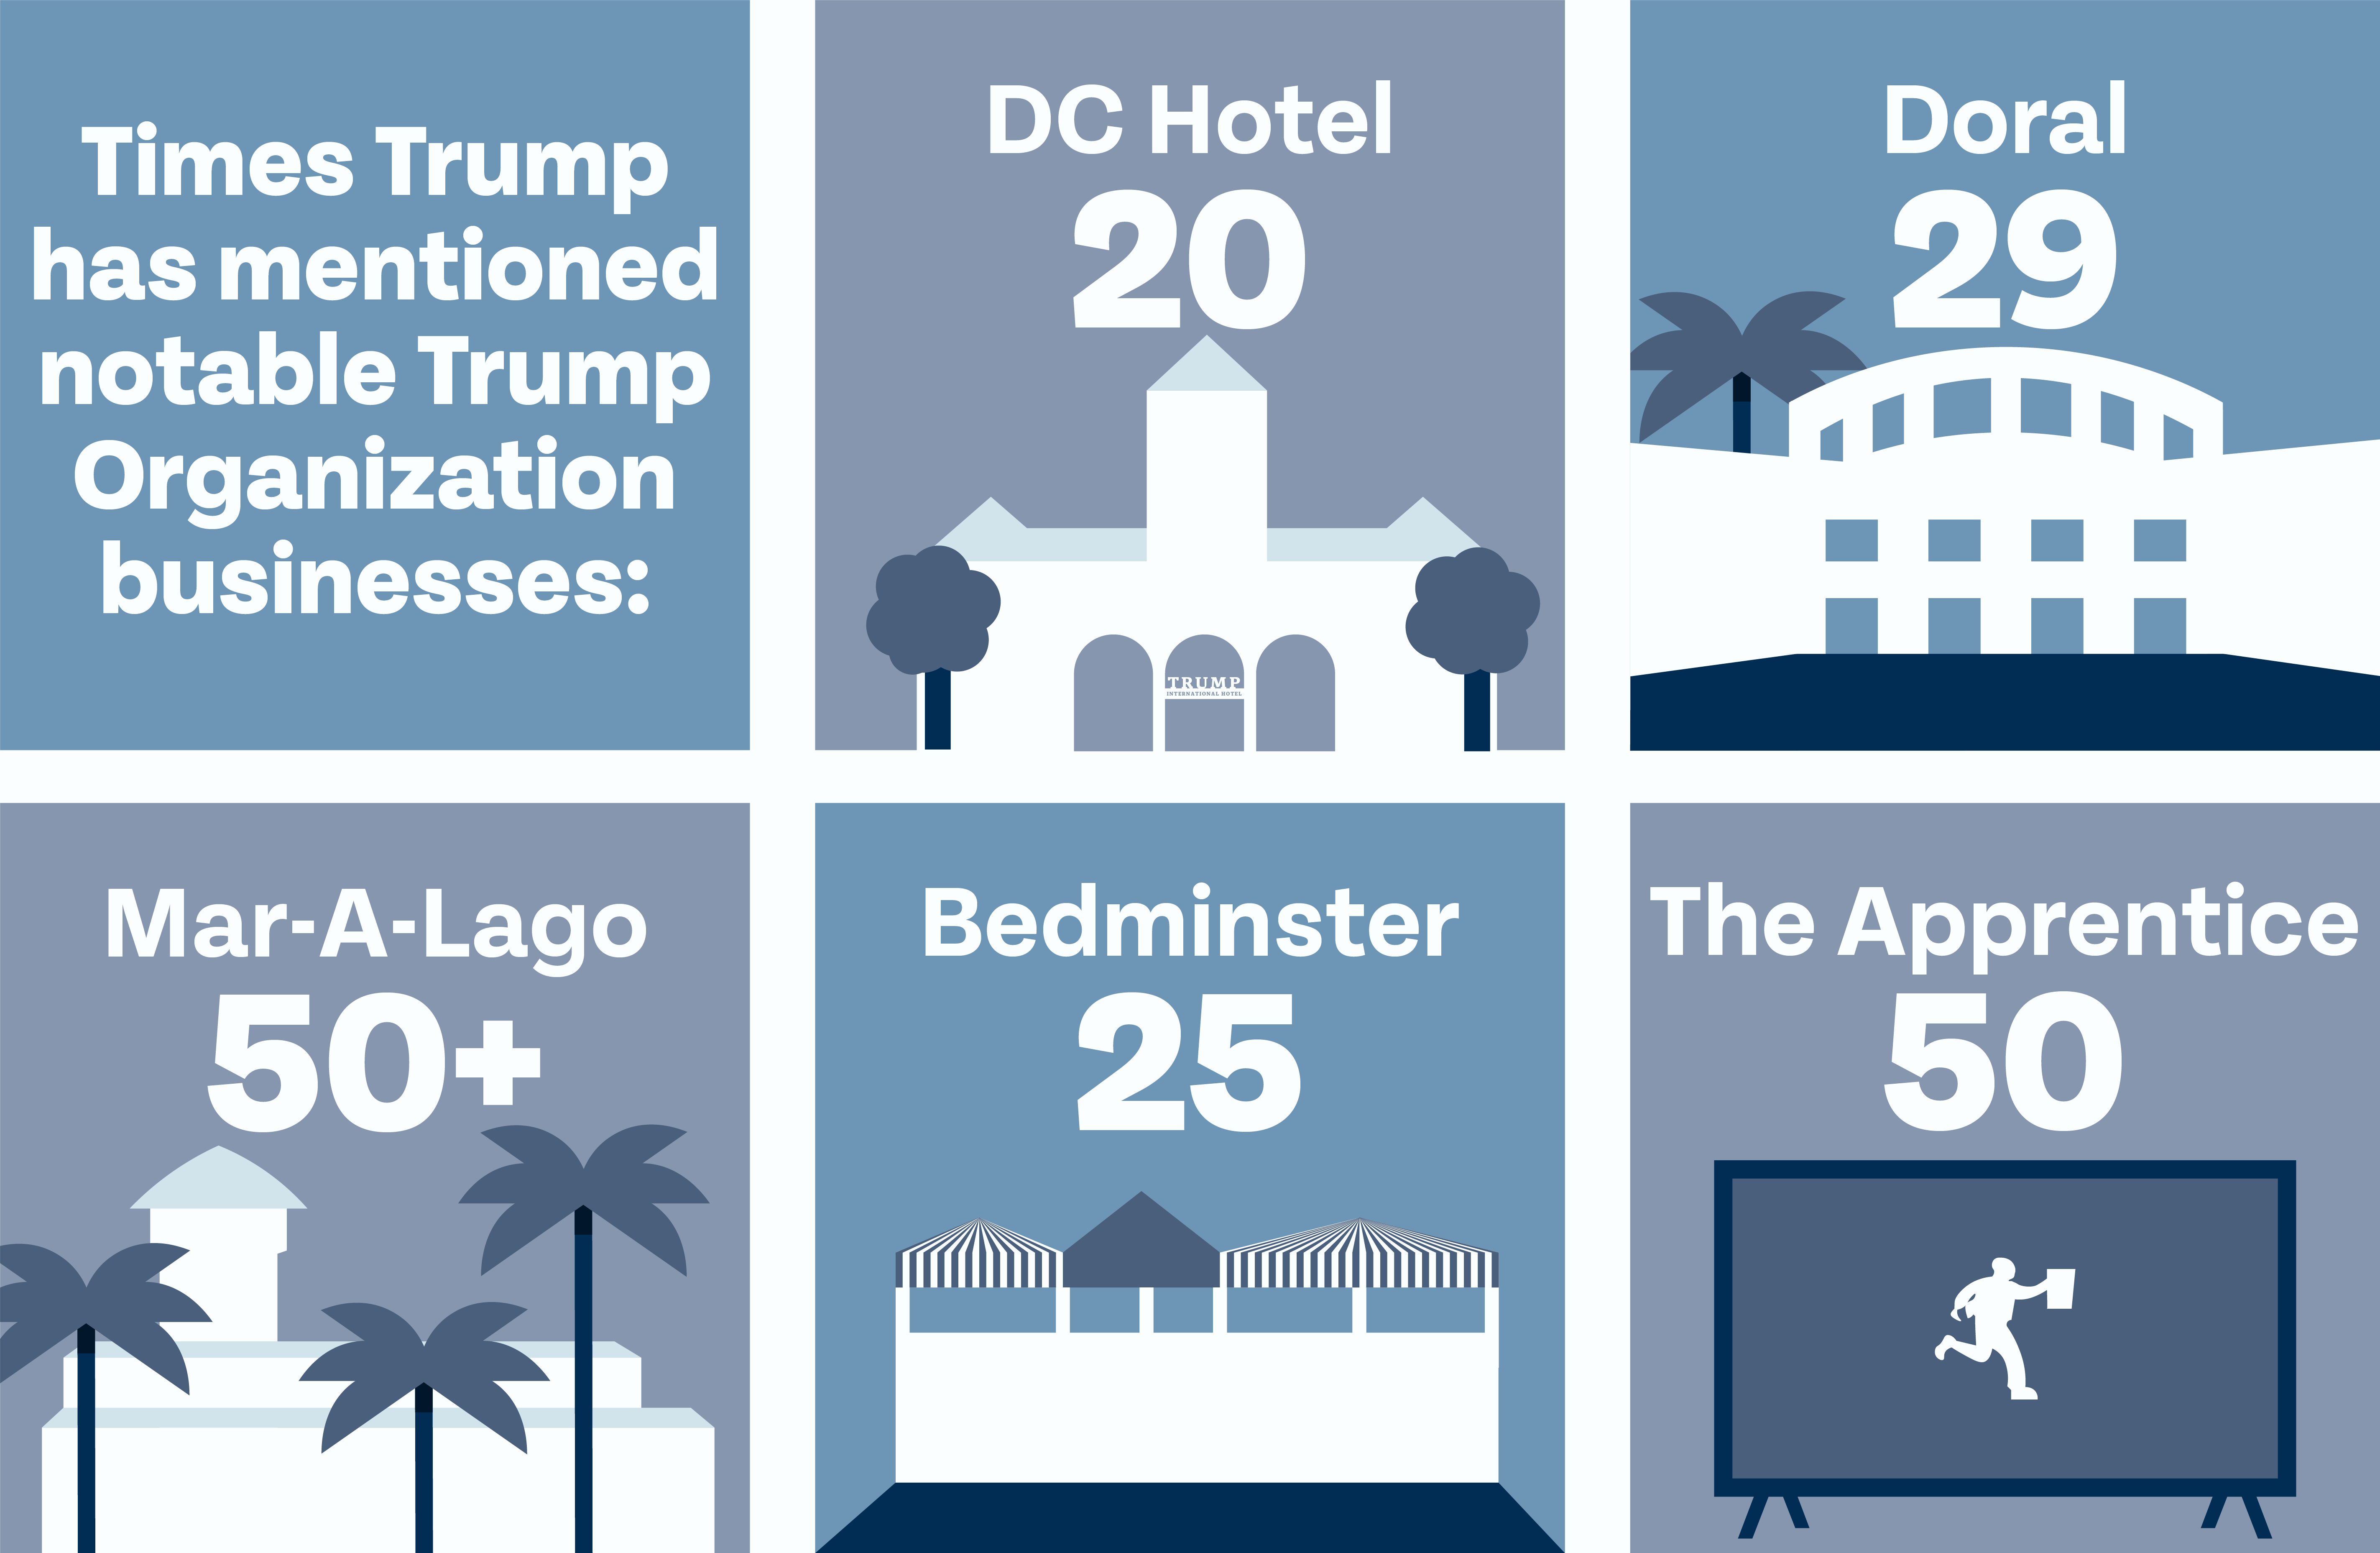 Six boxes side by side alternating in blue and grey. Box 1: text reads, "Times Trump has mentioned notable Trump Organization businesses:". Box 2: text reads, "DC Hotel: 20"; graphic of the hotel below. Box 3: text reads, "Doral: 29"; graphic of Doral resort below. Box 4: text reads, "Mar-A-Lago: 50+"; graphic of Mar-A-Lago and palm trees below. Box 5: text reads, "Bedminster: 25"; graphic of Bedminster below. Box 6: text reads, "The Apprentice 50"; graphic of TV with Apprentice logo below.